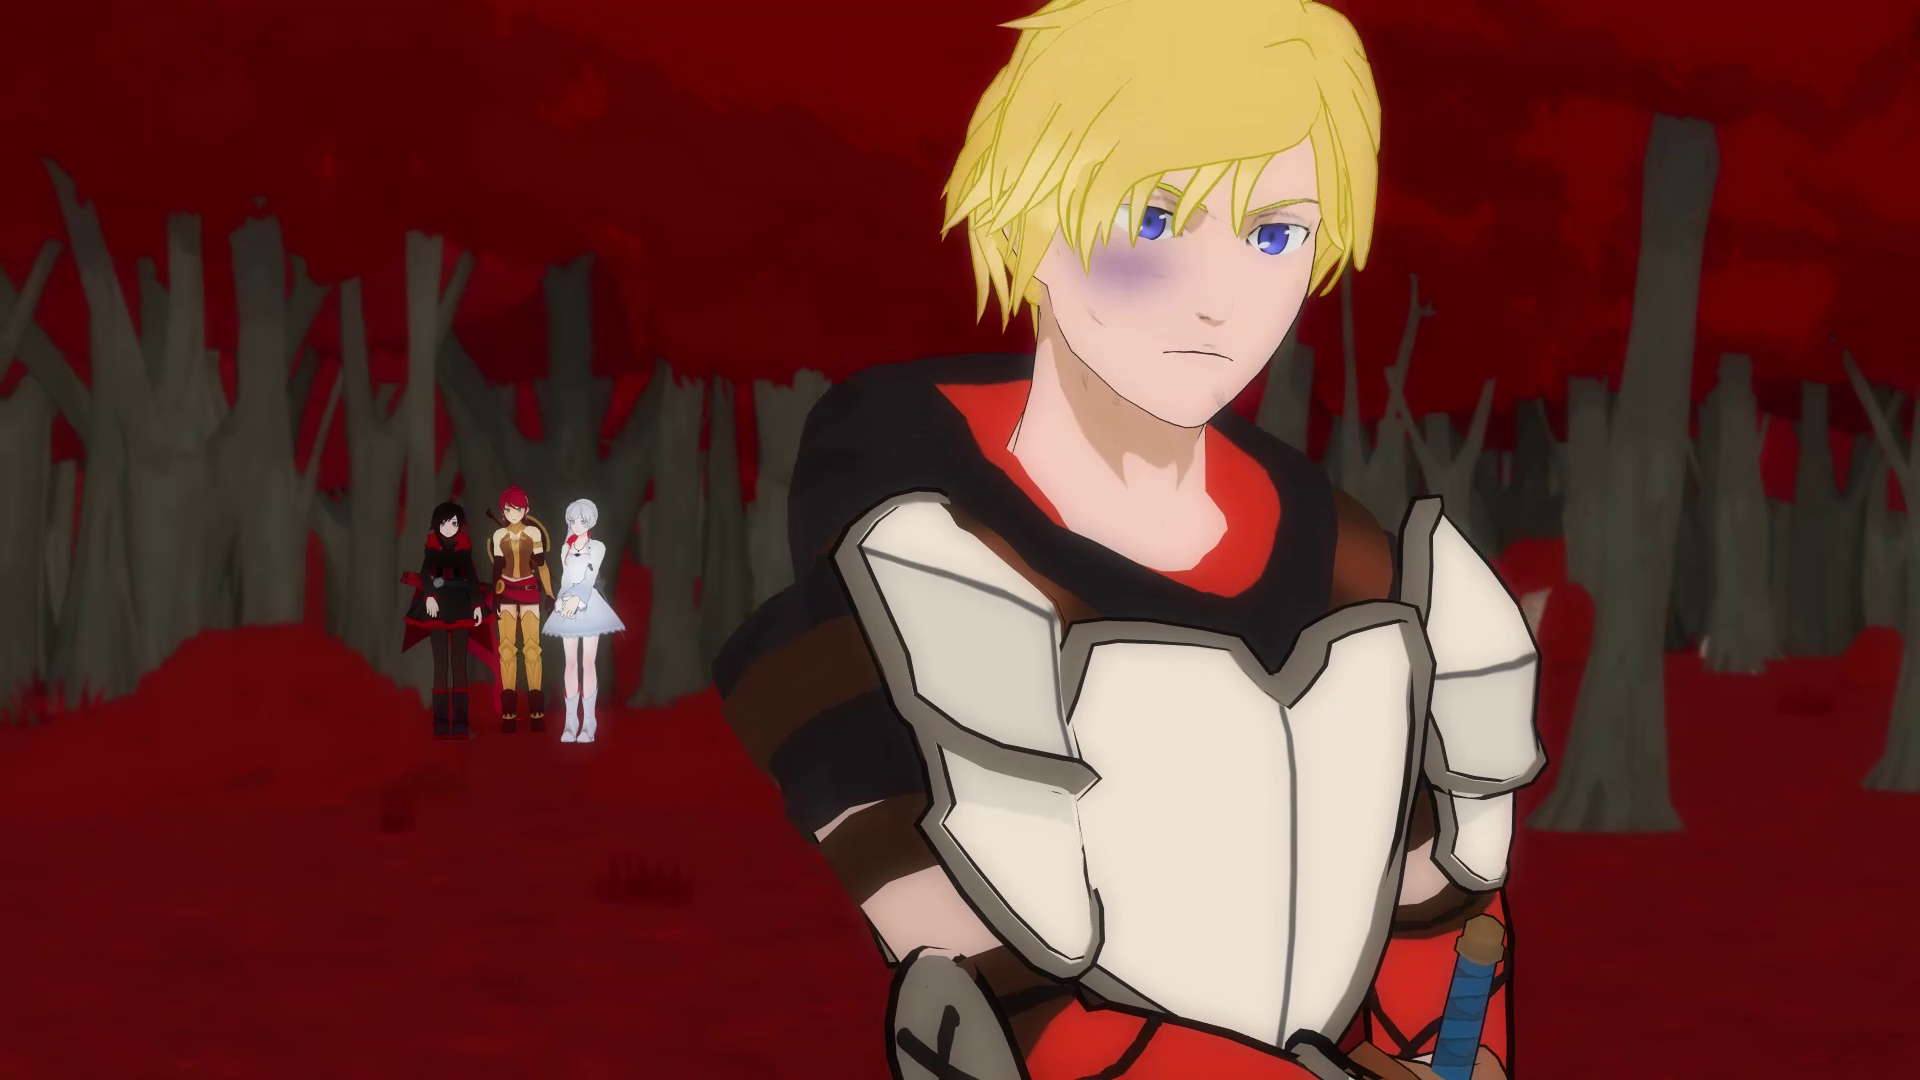 Image 1114 Forever Fall Pt2 06948png Rwby Wiki Fandom Powered By Wikia 8625